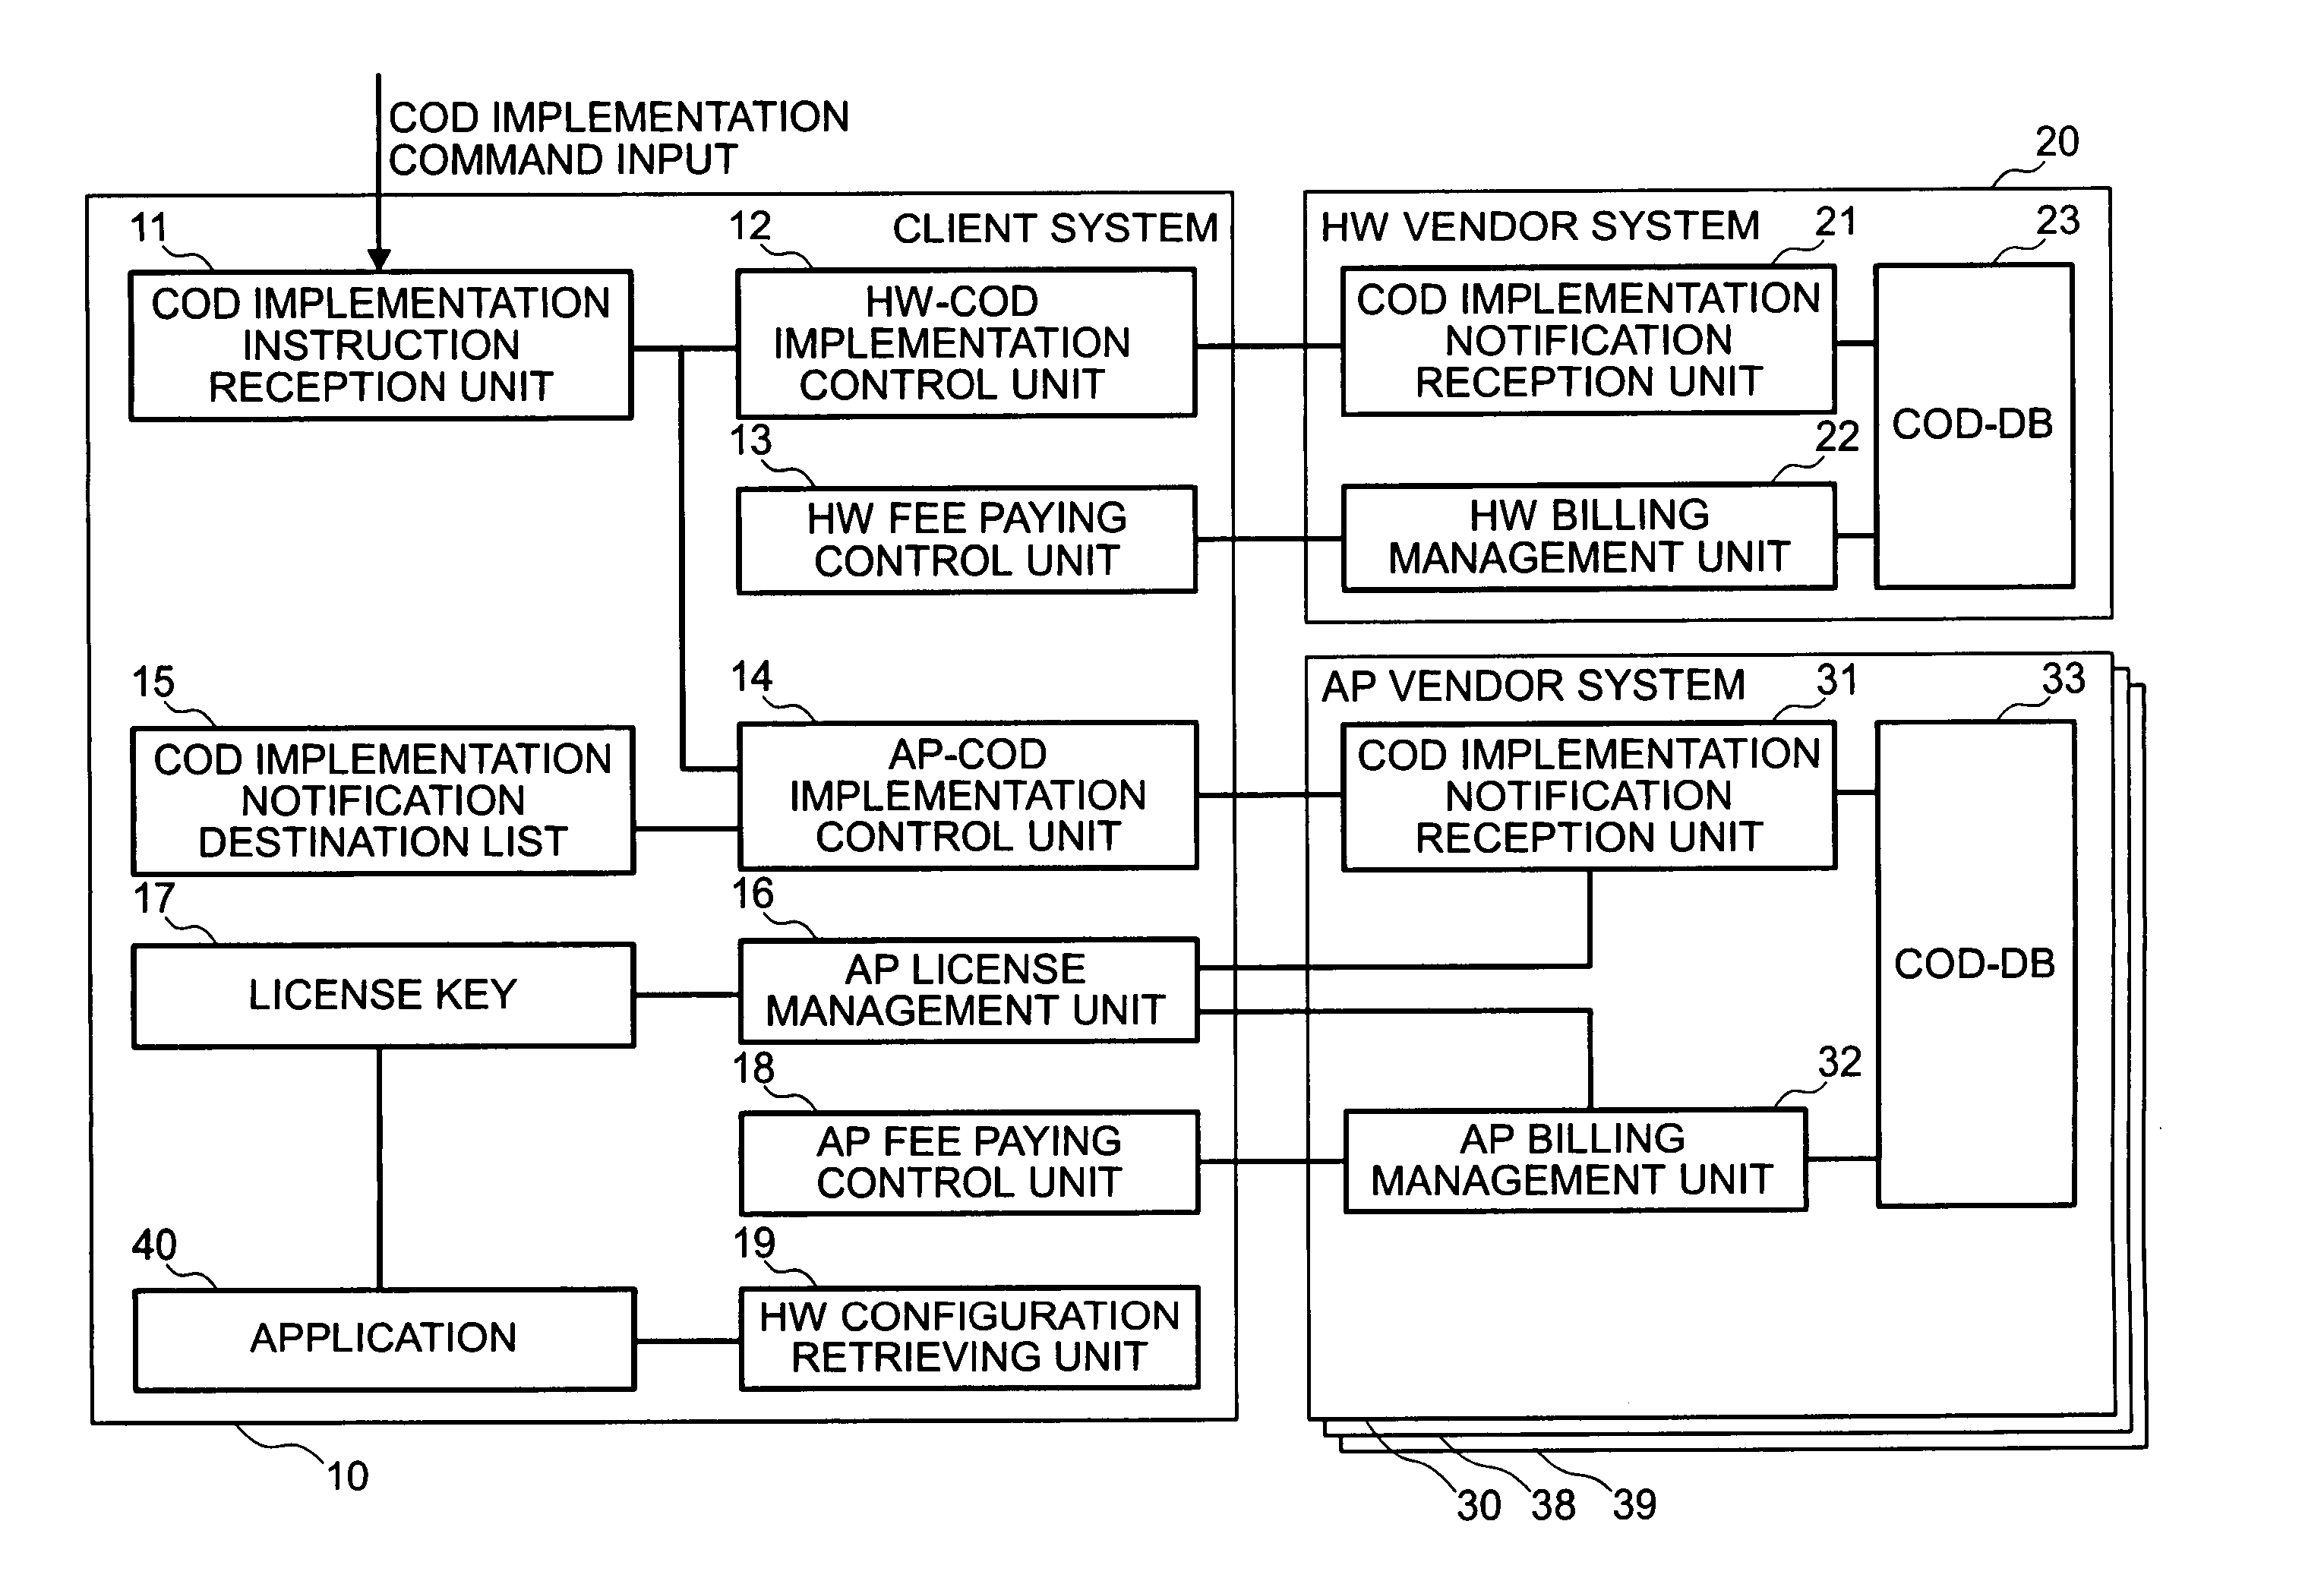 Method for modifying computer configuration and configuration of program which operates on computer, and computing device and system for implementing the method